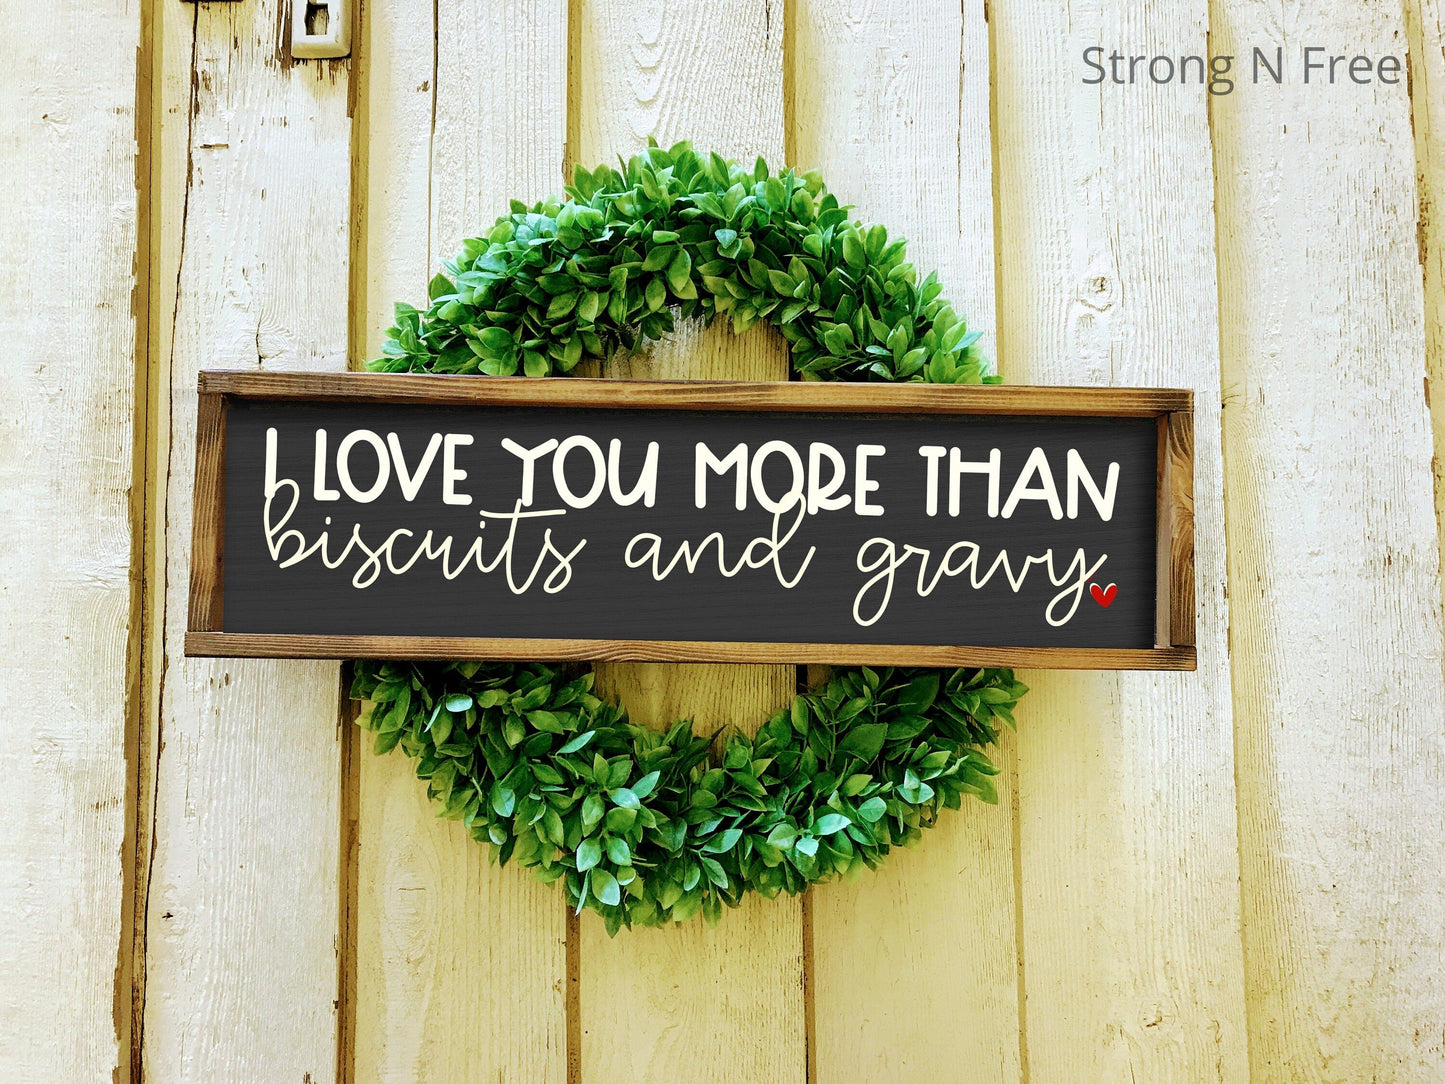 I love you more, I love you more than biscuits and gravy, I love you more sign, wooden signs, signs, handmade